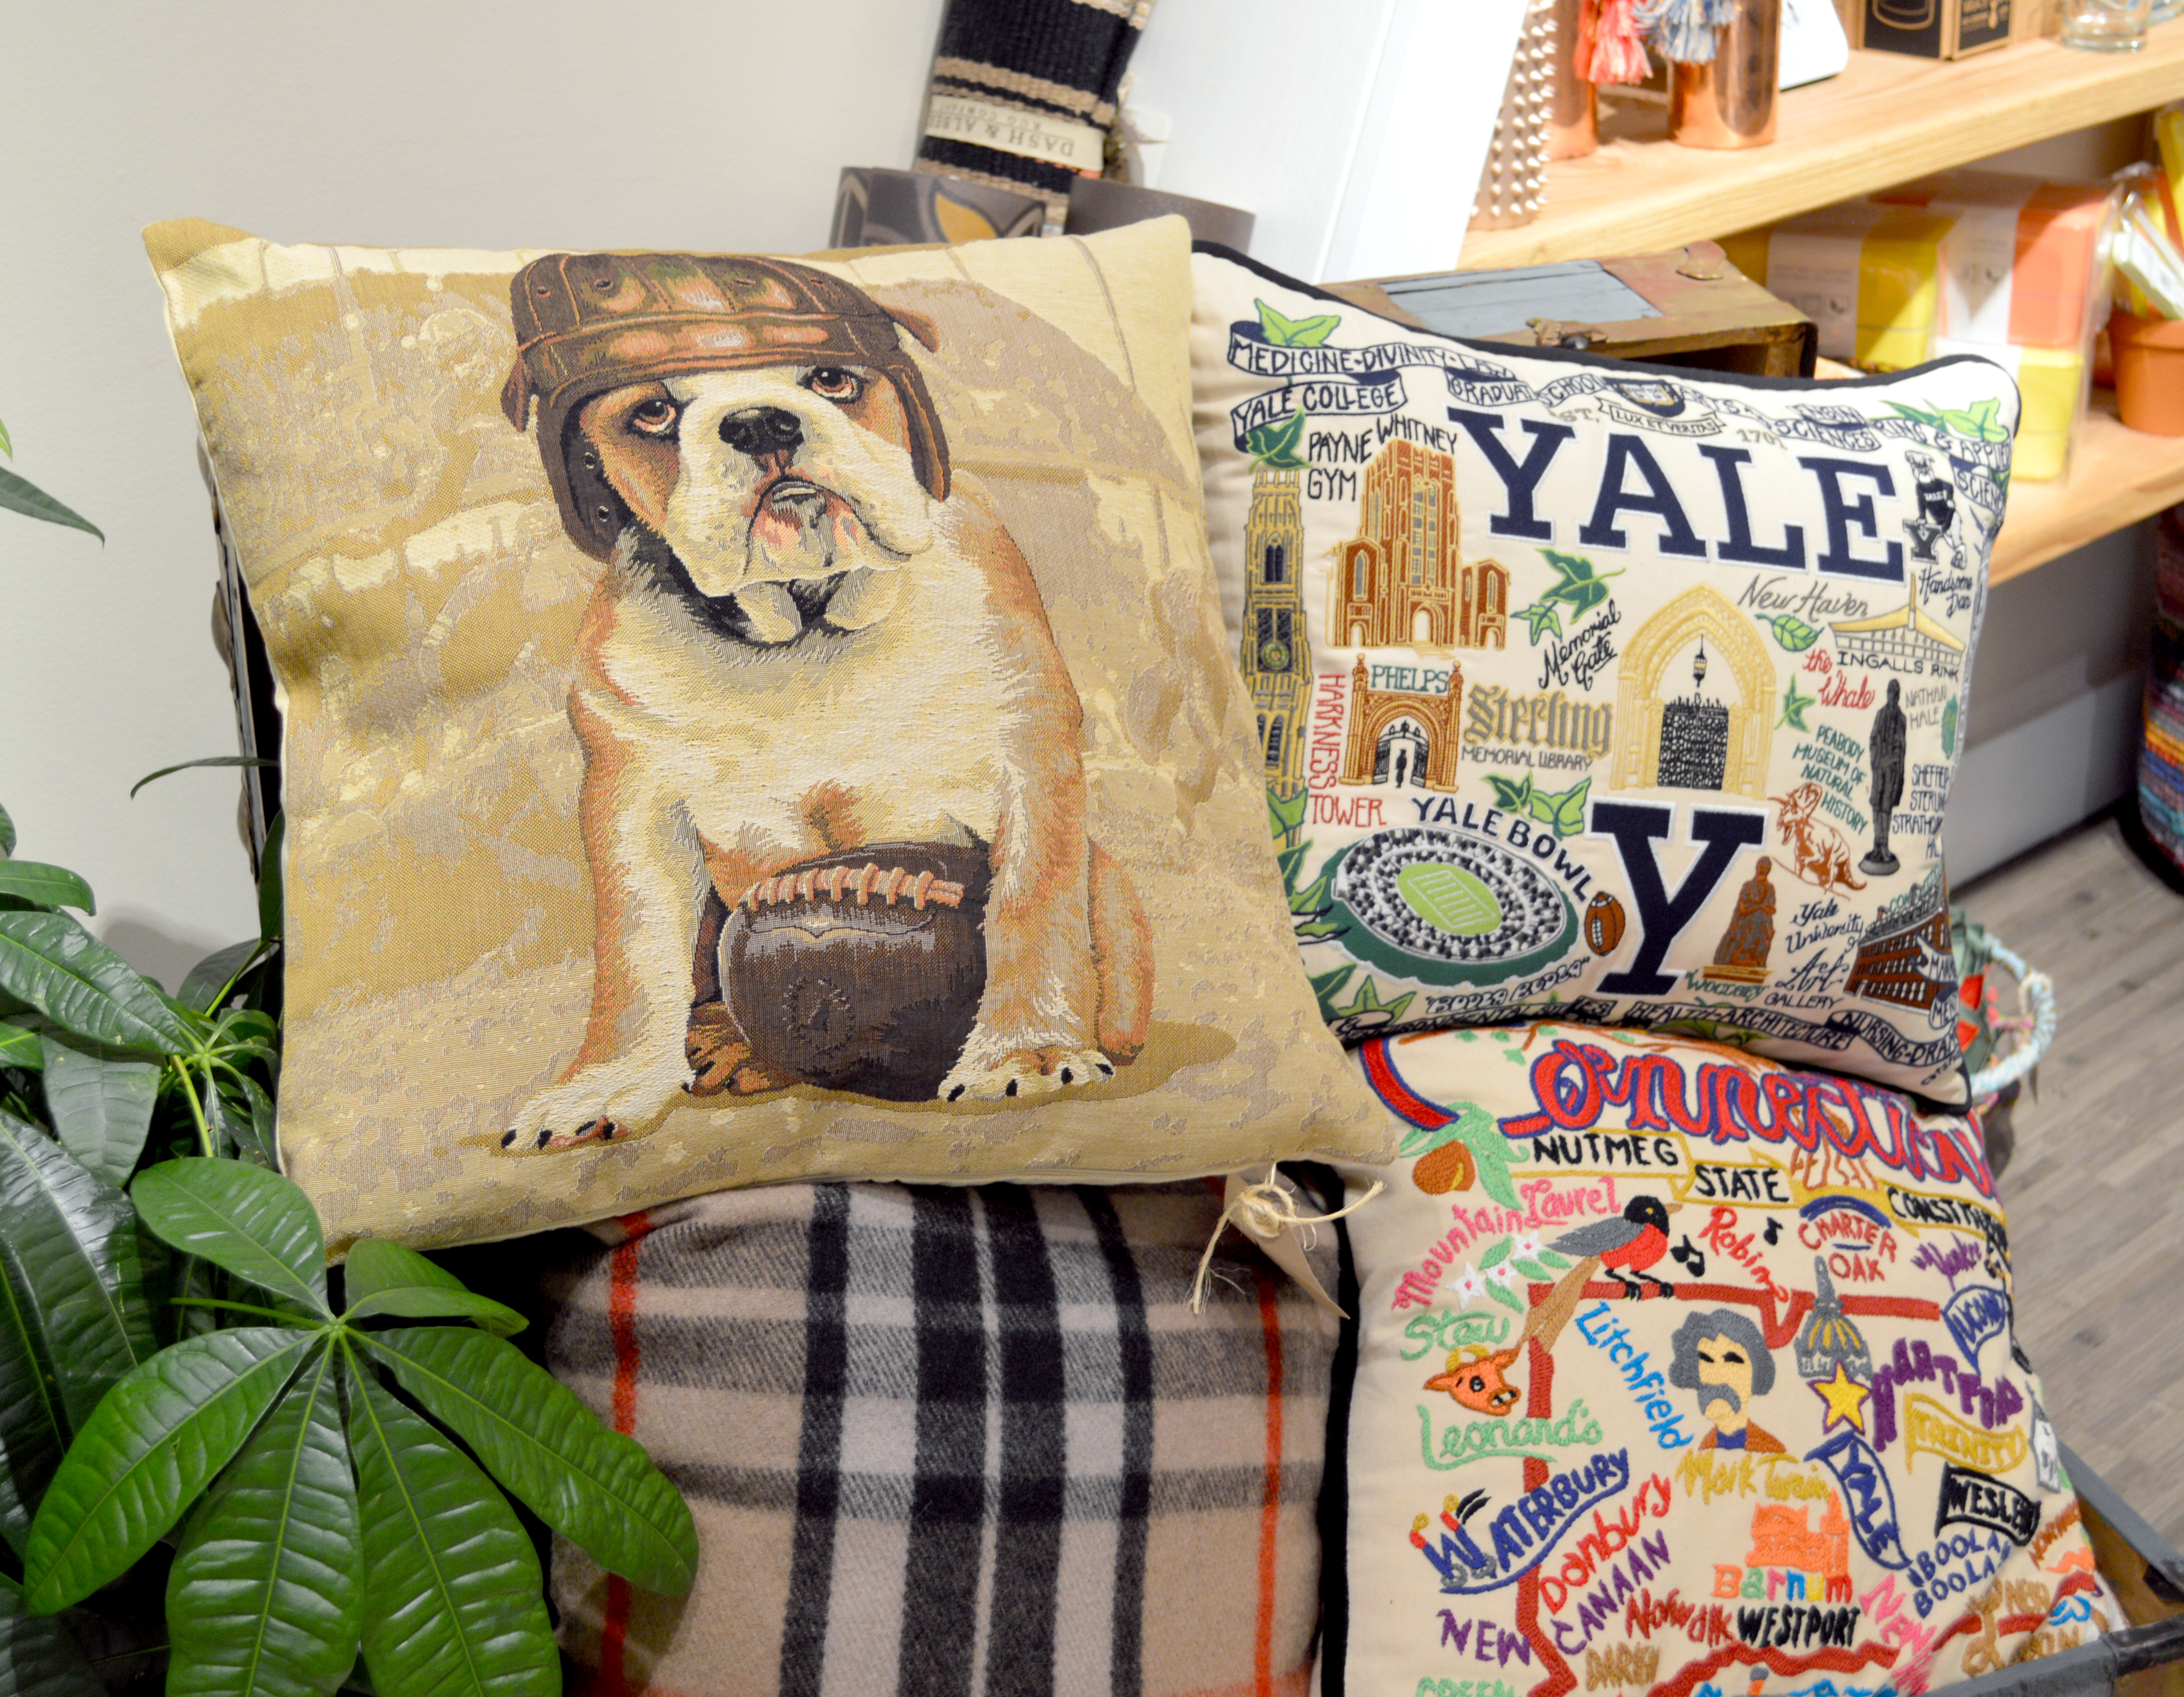 Pillow with Handsome Dan in vintage football attire and pillow with "Yale" name and Yale landmarks artfully embroidered on it.